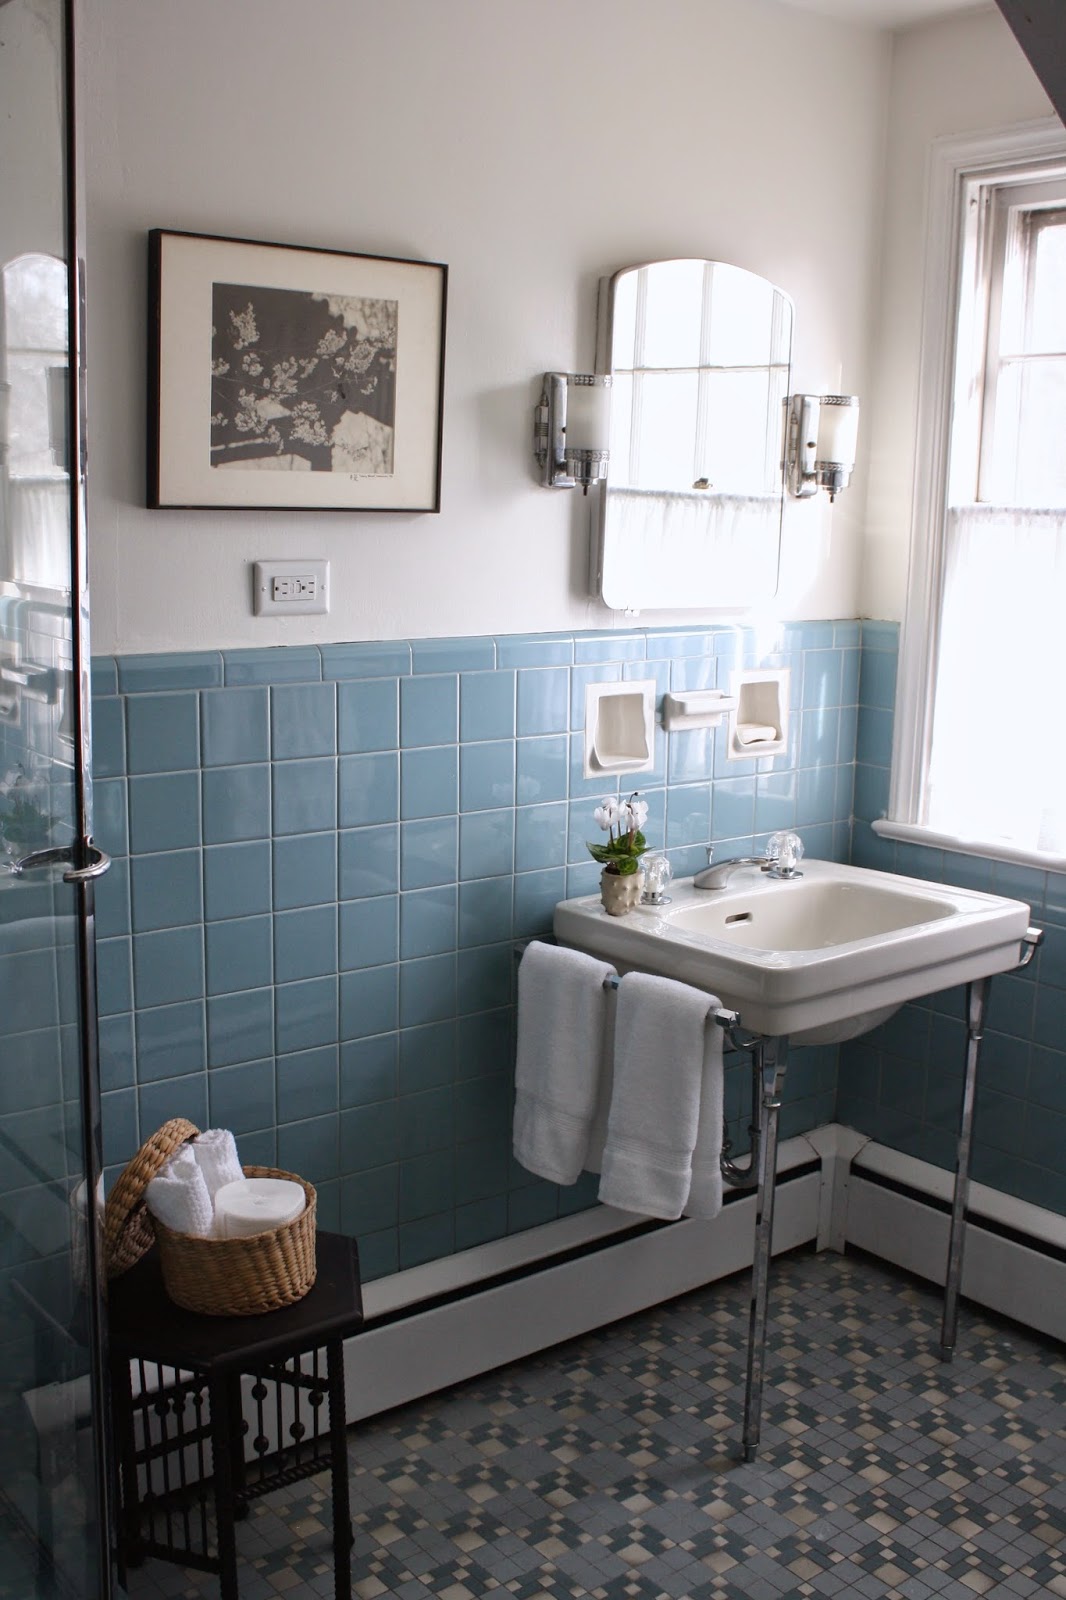 36 nice ideas and pictures of vintage bathroom tile design ...
